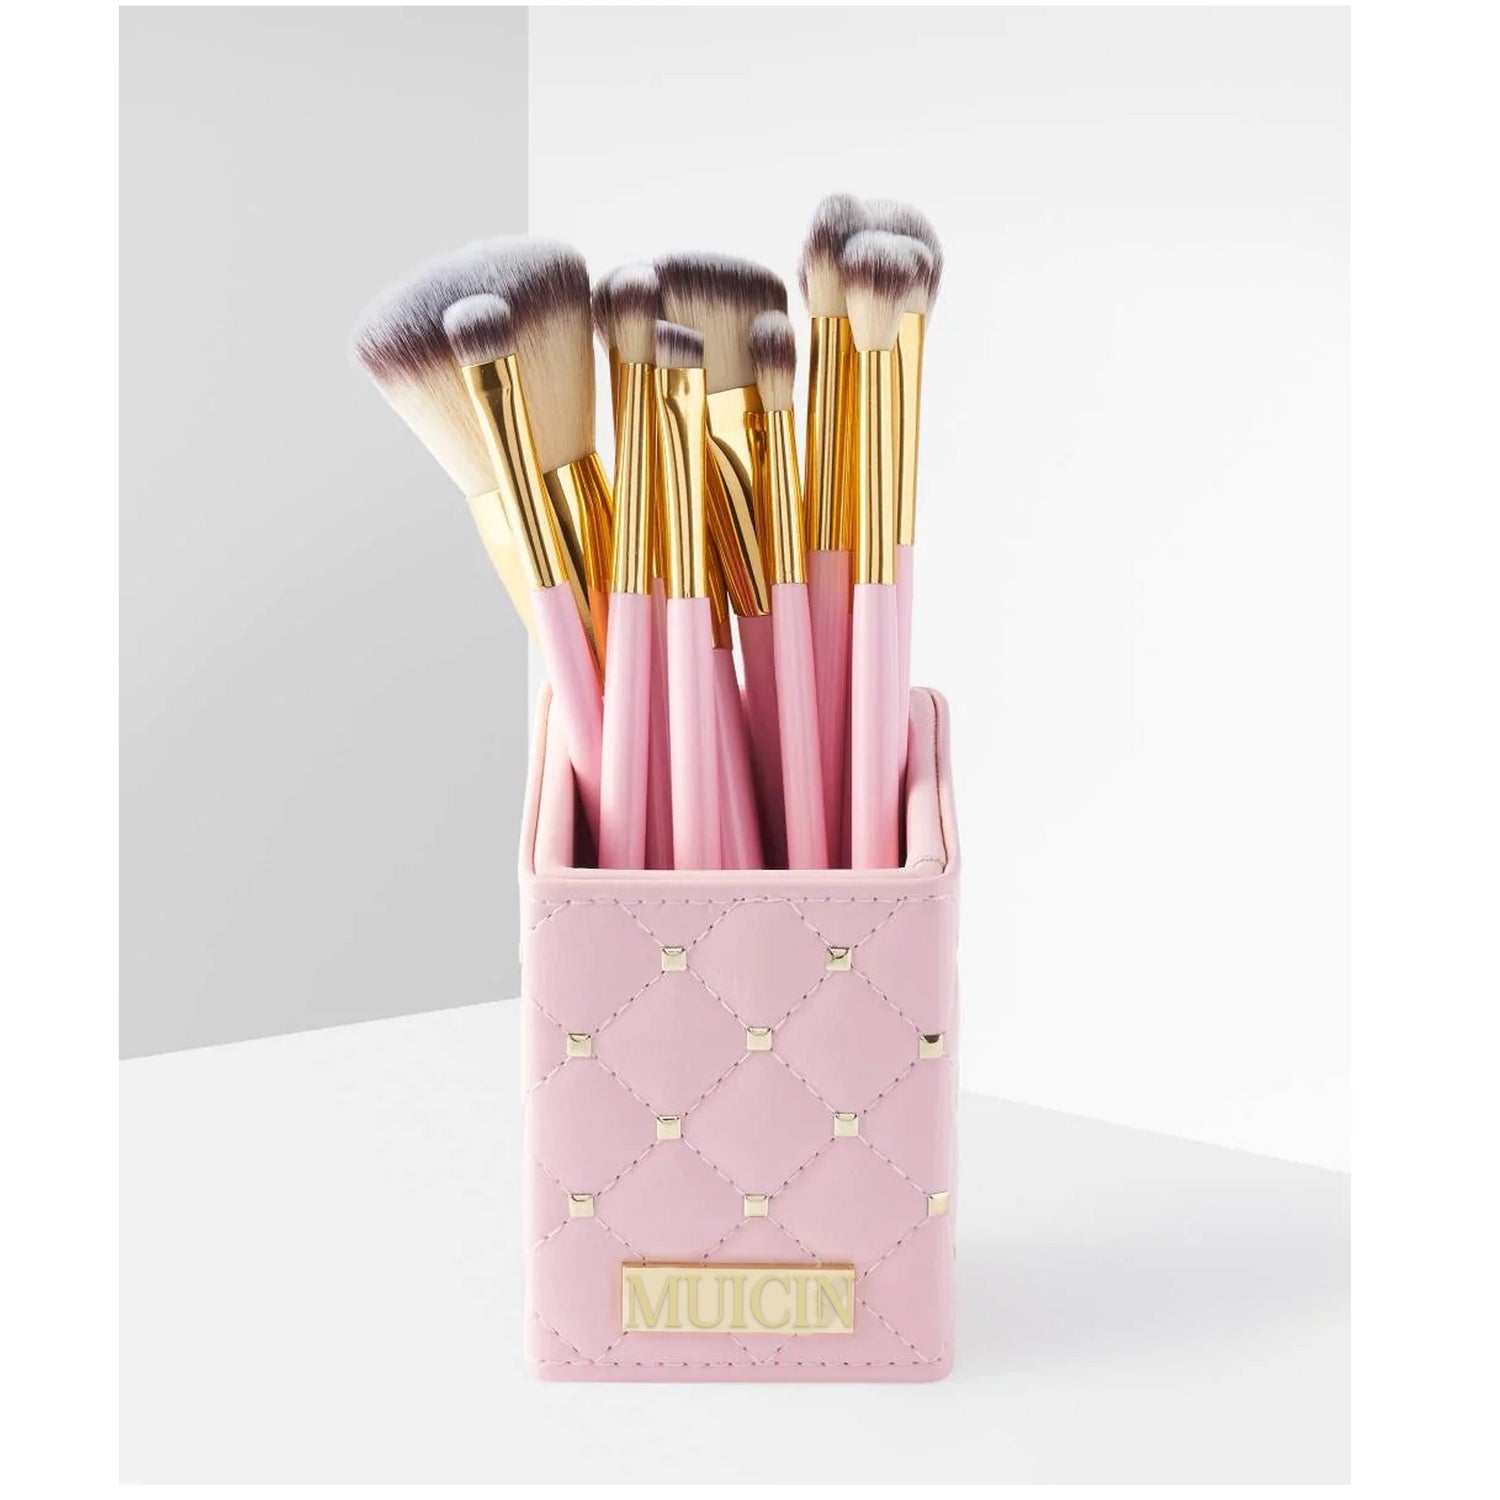 PINK STUDDED NATURAL HAIR MAKEUP BRUSHES - 12 PIECES FOR STYLISH APPLICATION